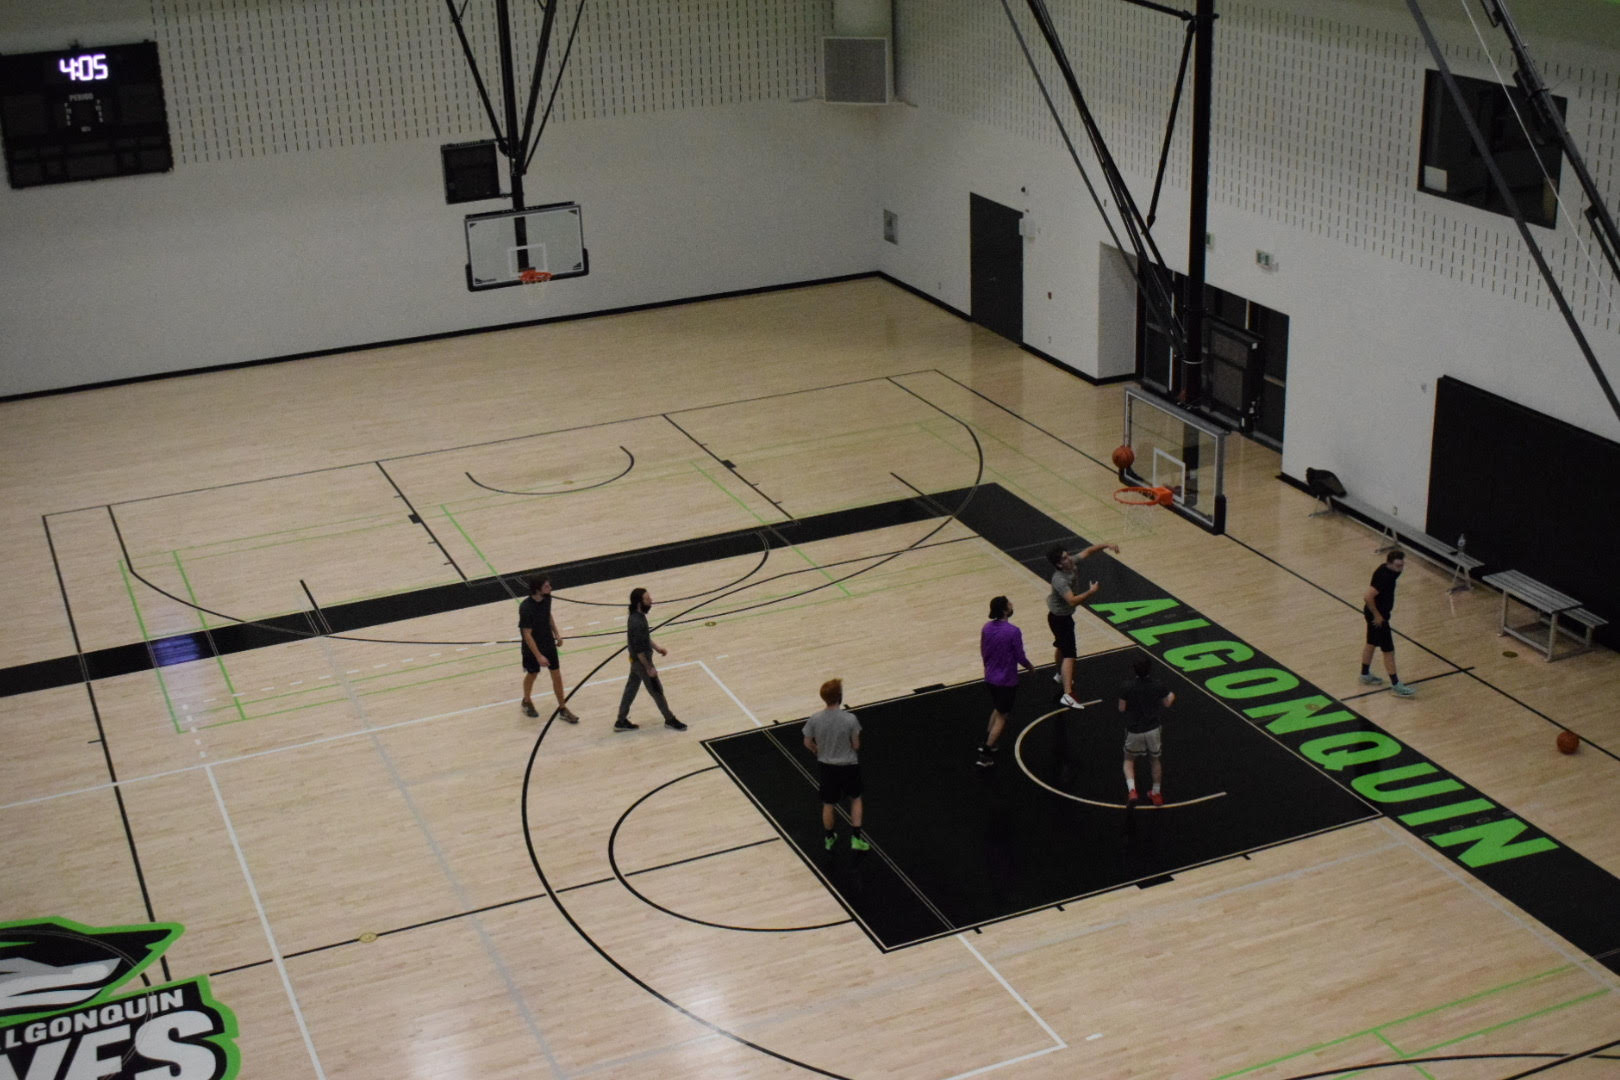 Algonquin College varsity sports hit the practice court for the first time this semester. Over the last two years, it has been difficult for many people to get in their recommended weekly exercise.